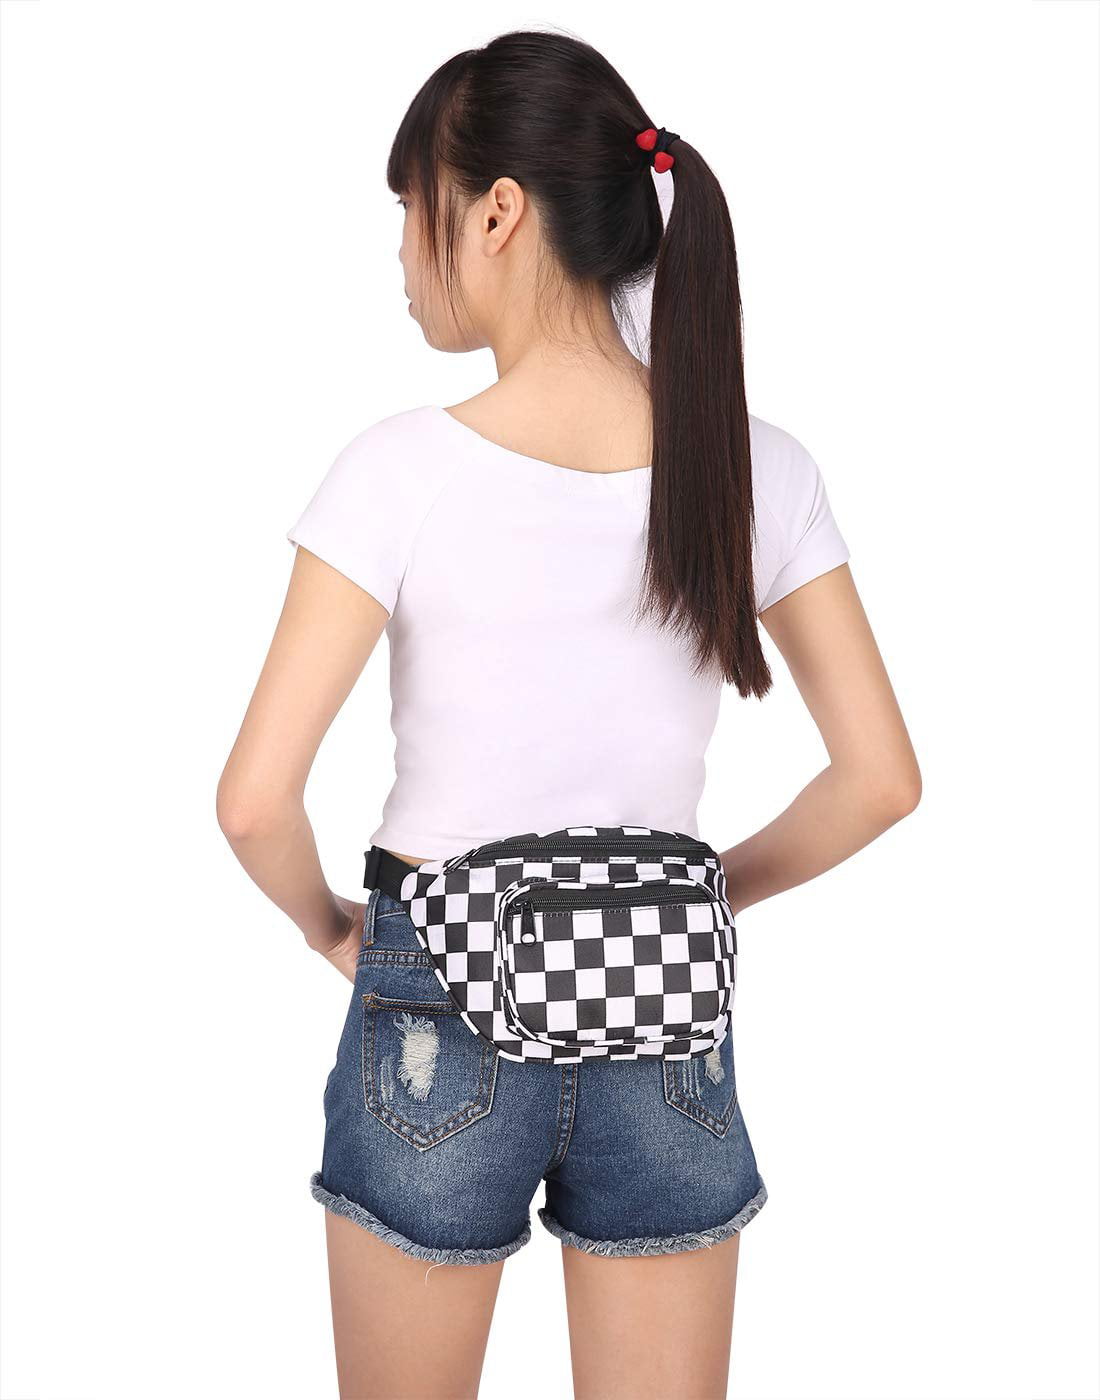 Fanny Pack, PU Waist Fanny Pack Bum Bag for Women Men，Waterproof Waist Pack  Retro Neon Fanny Bag for Festival, Rave (Black and White Checkerboard)